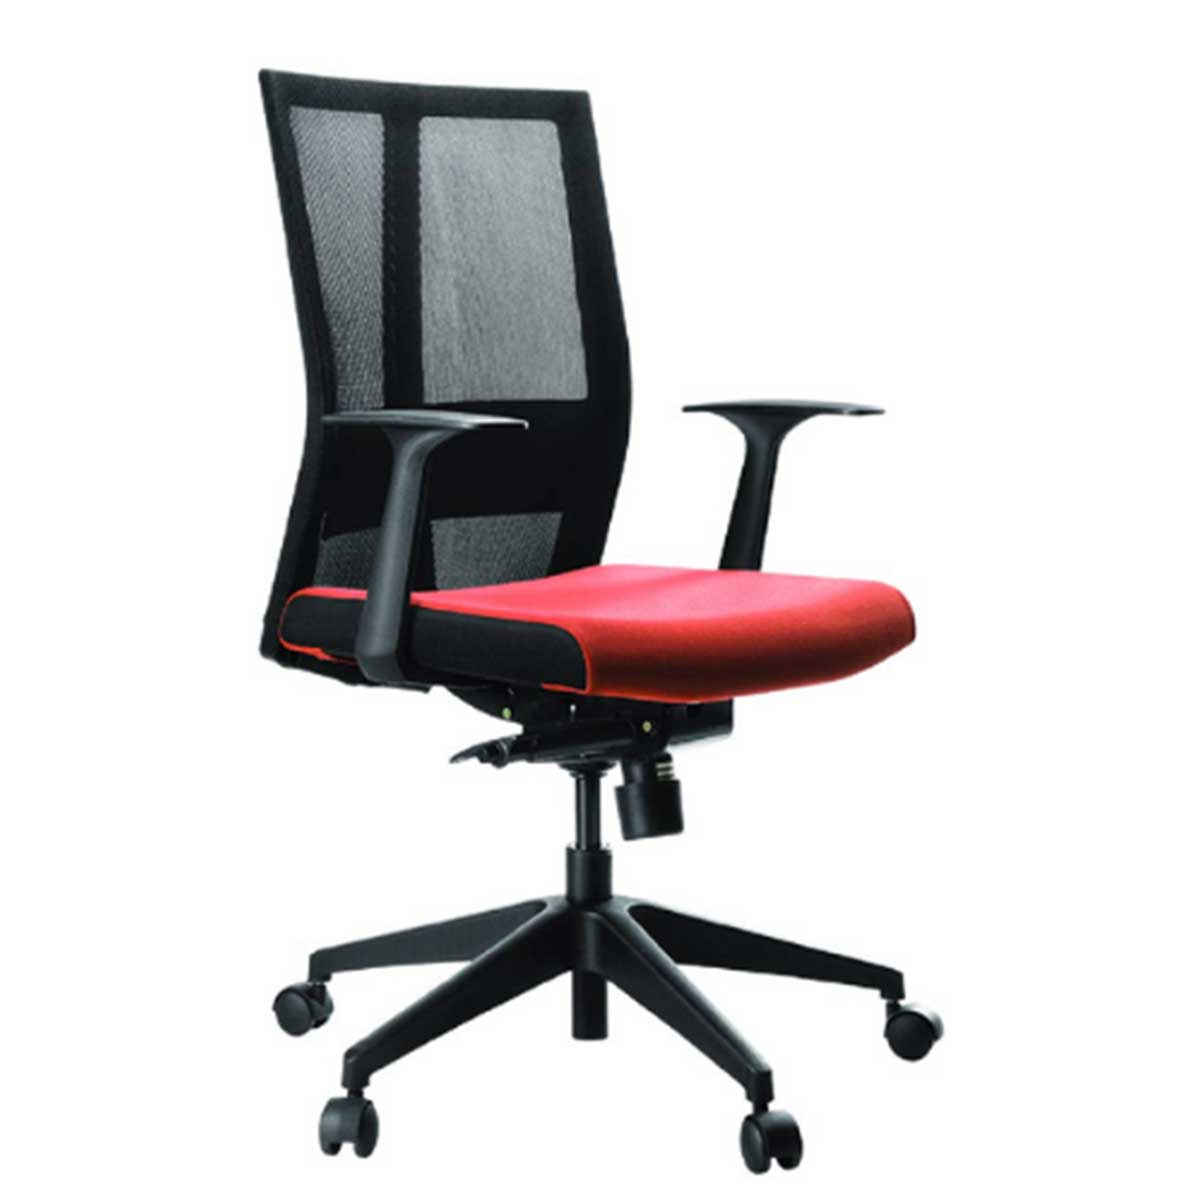 Conference Chair Manufacturers, Suppliers, Exporters in Delhi 